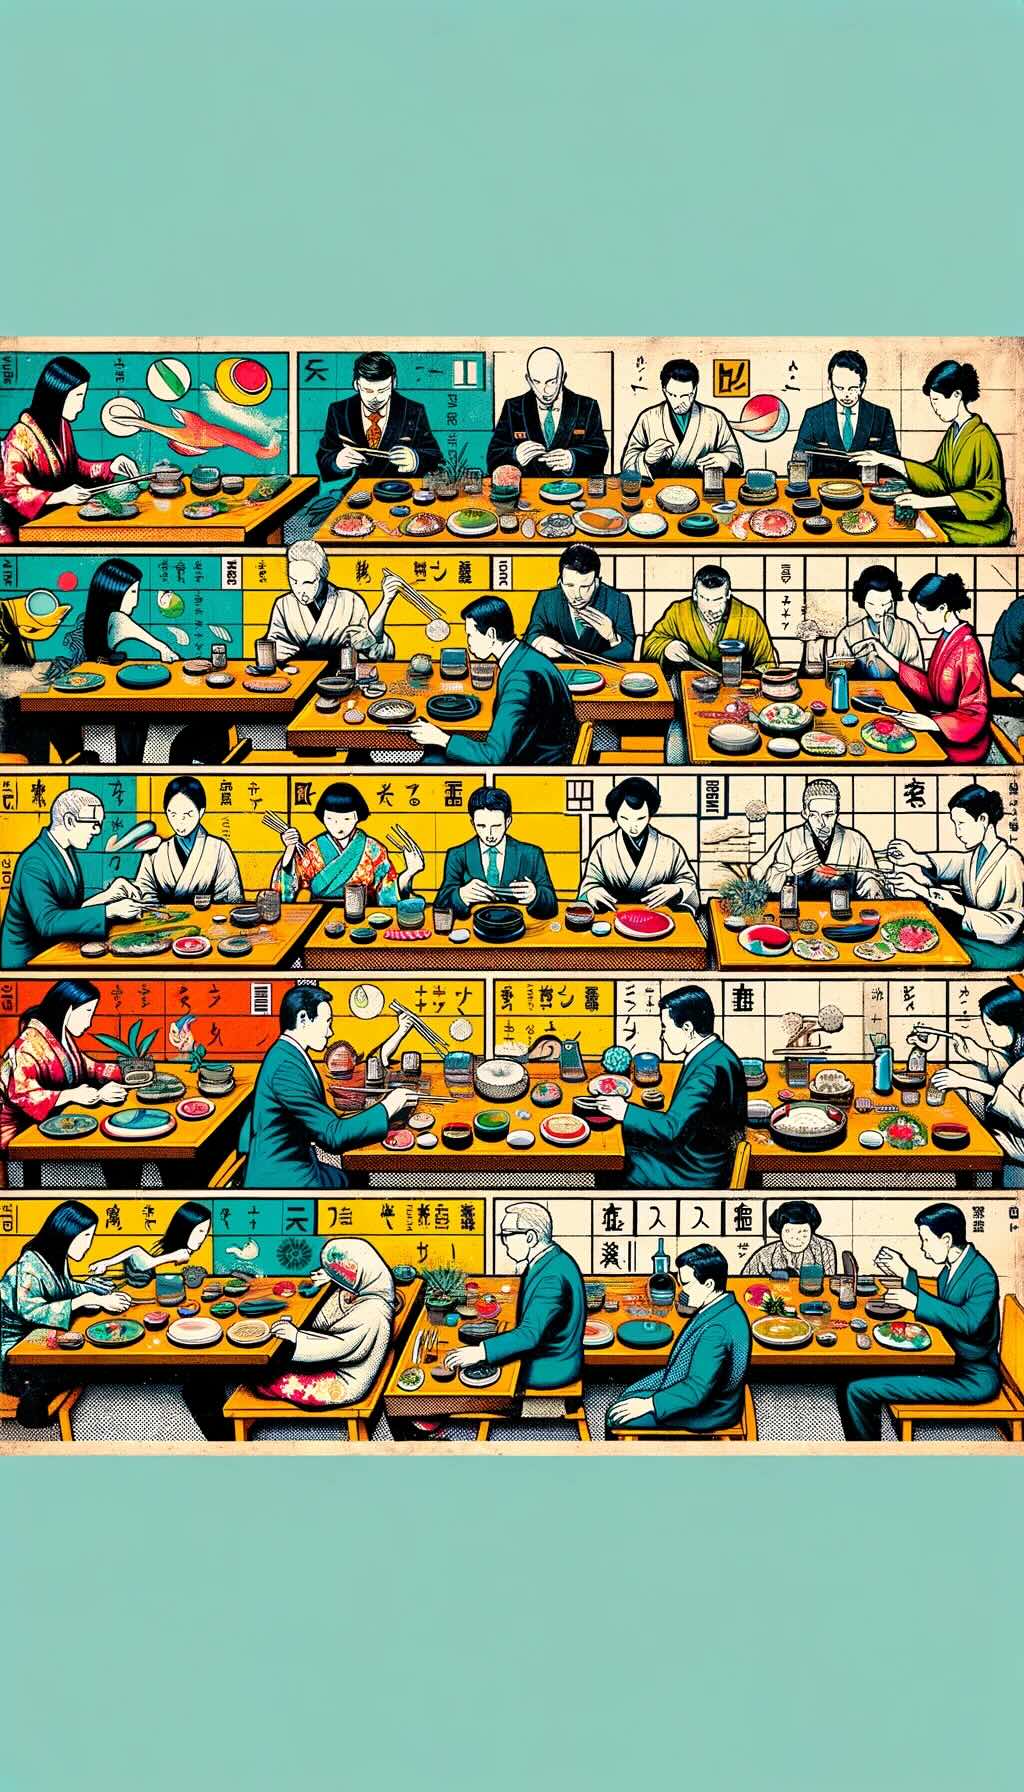 Common dining etiquette mistakes in Japan. It depicts scenes in a Japanese dining setting, such as a sushi bar or traditional restaurant, showing diners making etiquette mistakes like improper use of chopsticks, incorrect sushi soy sauce dipping, and misuse of an oshibori. It provides a modern and abstract interpretation of these common dining faux pas, emphasizing the importance of understanding and respecting Japanese dining etiquette.